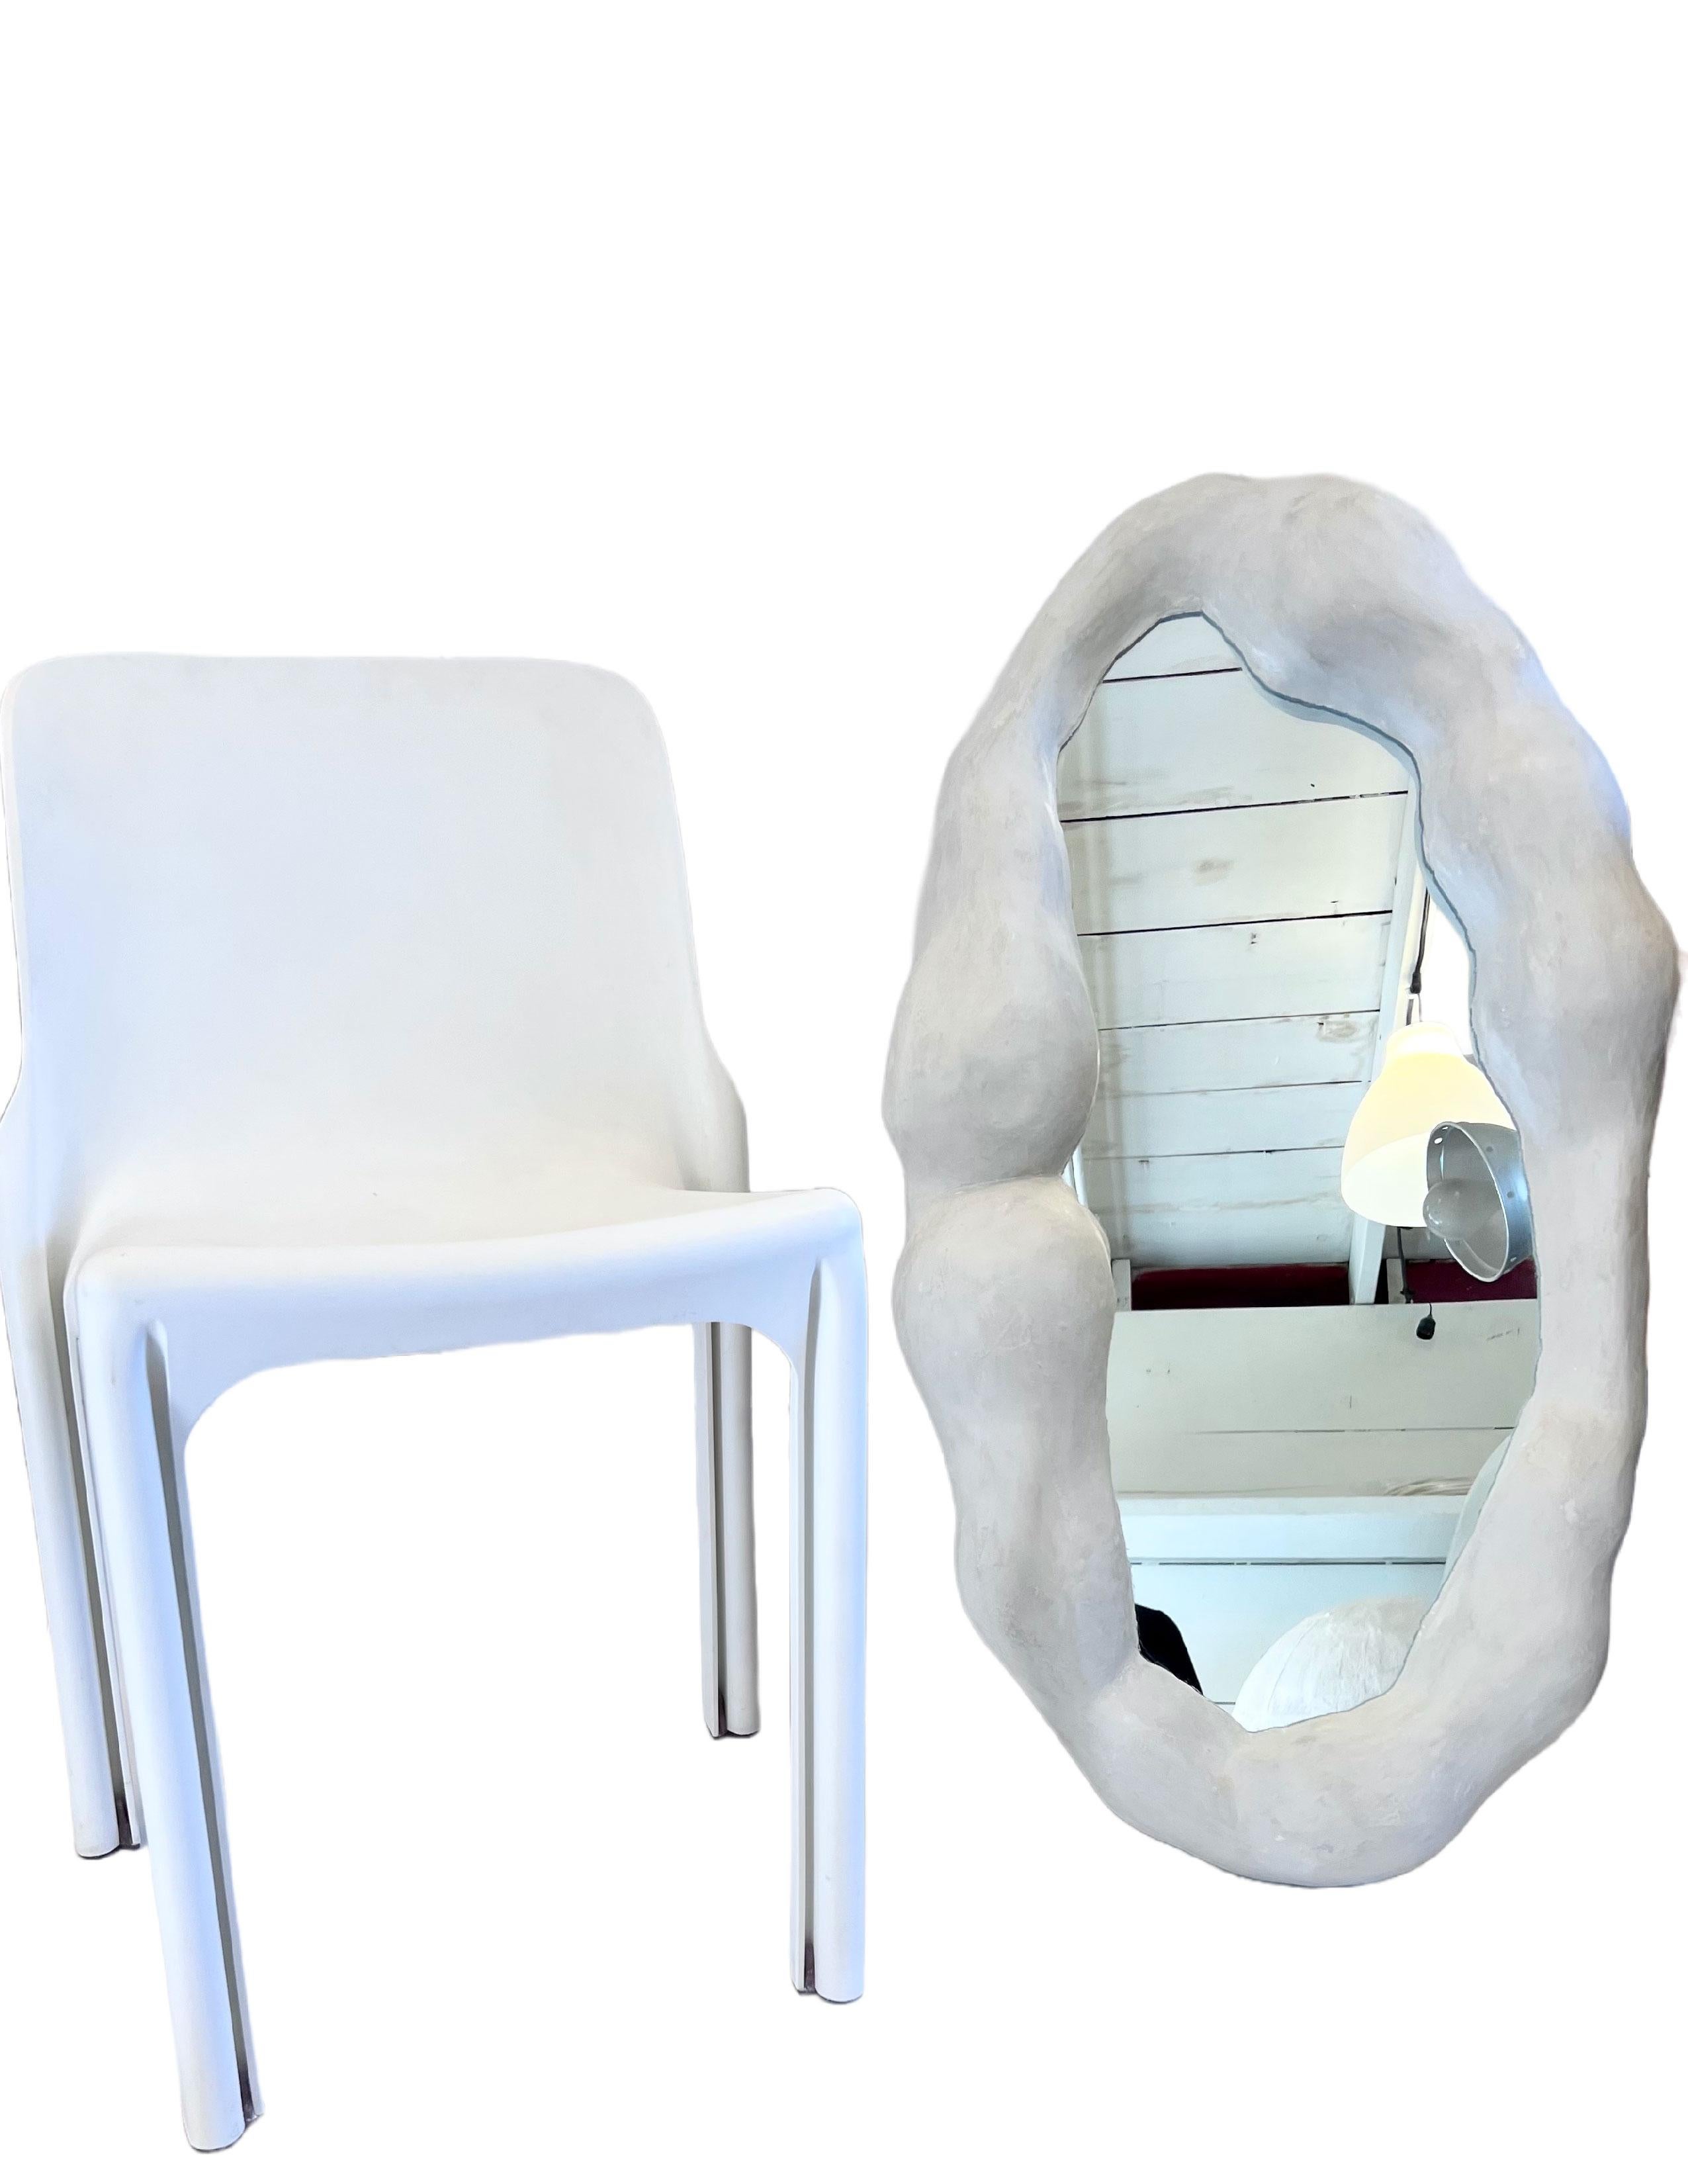 Contemporary Biomorphic Mirror N.1 by Studio Chora, Large Wall Mirror, Off-White, In Stock